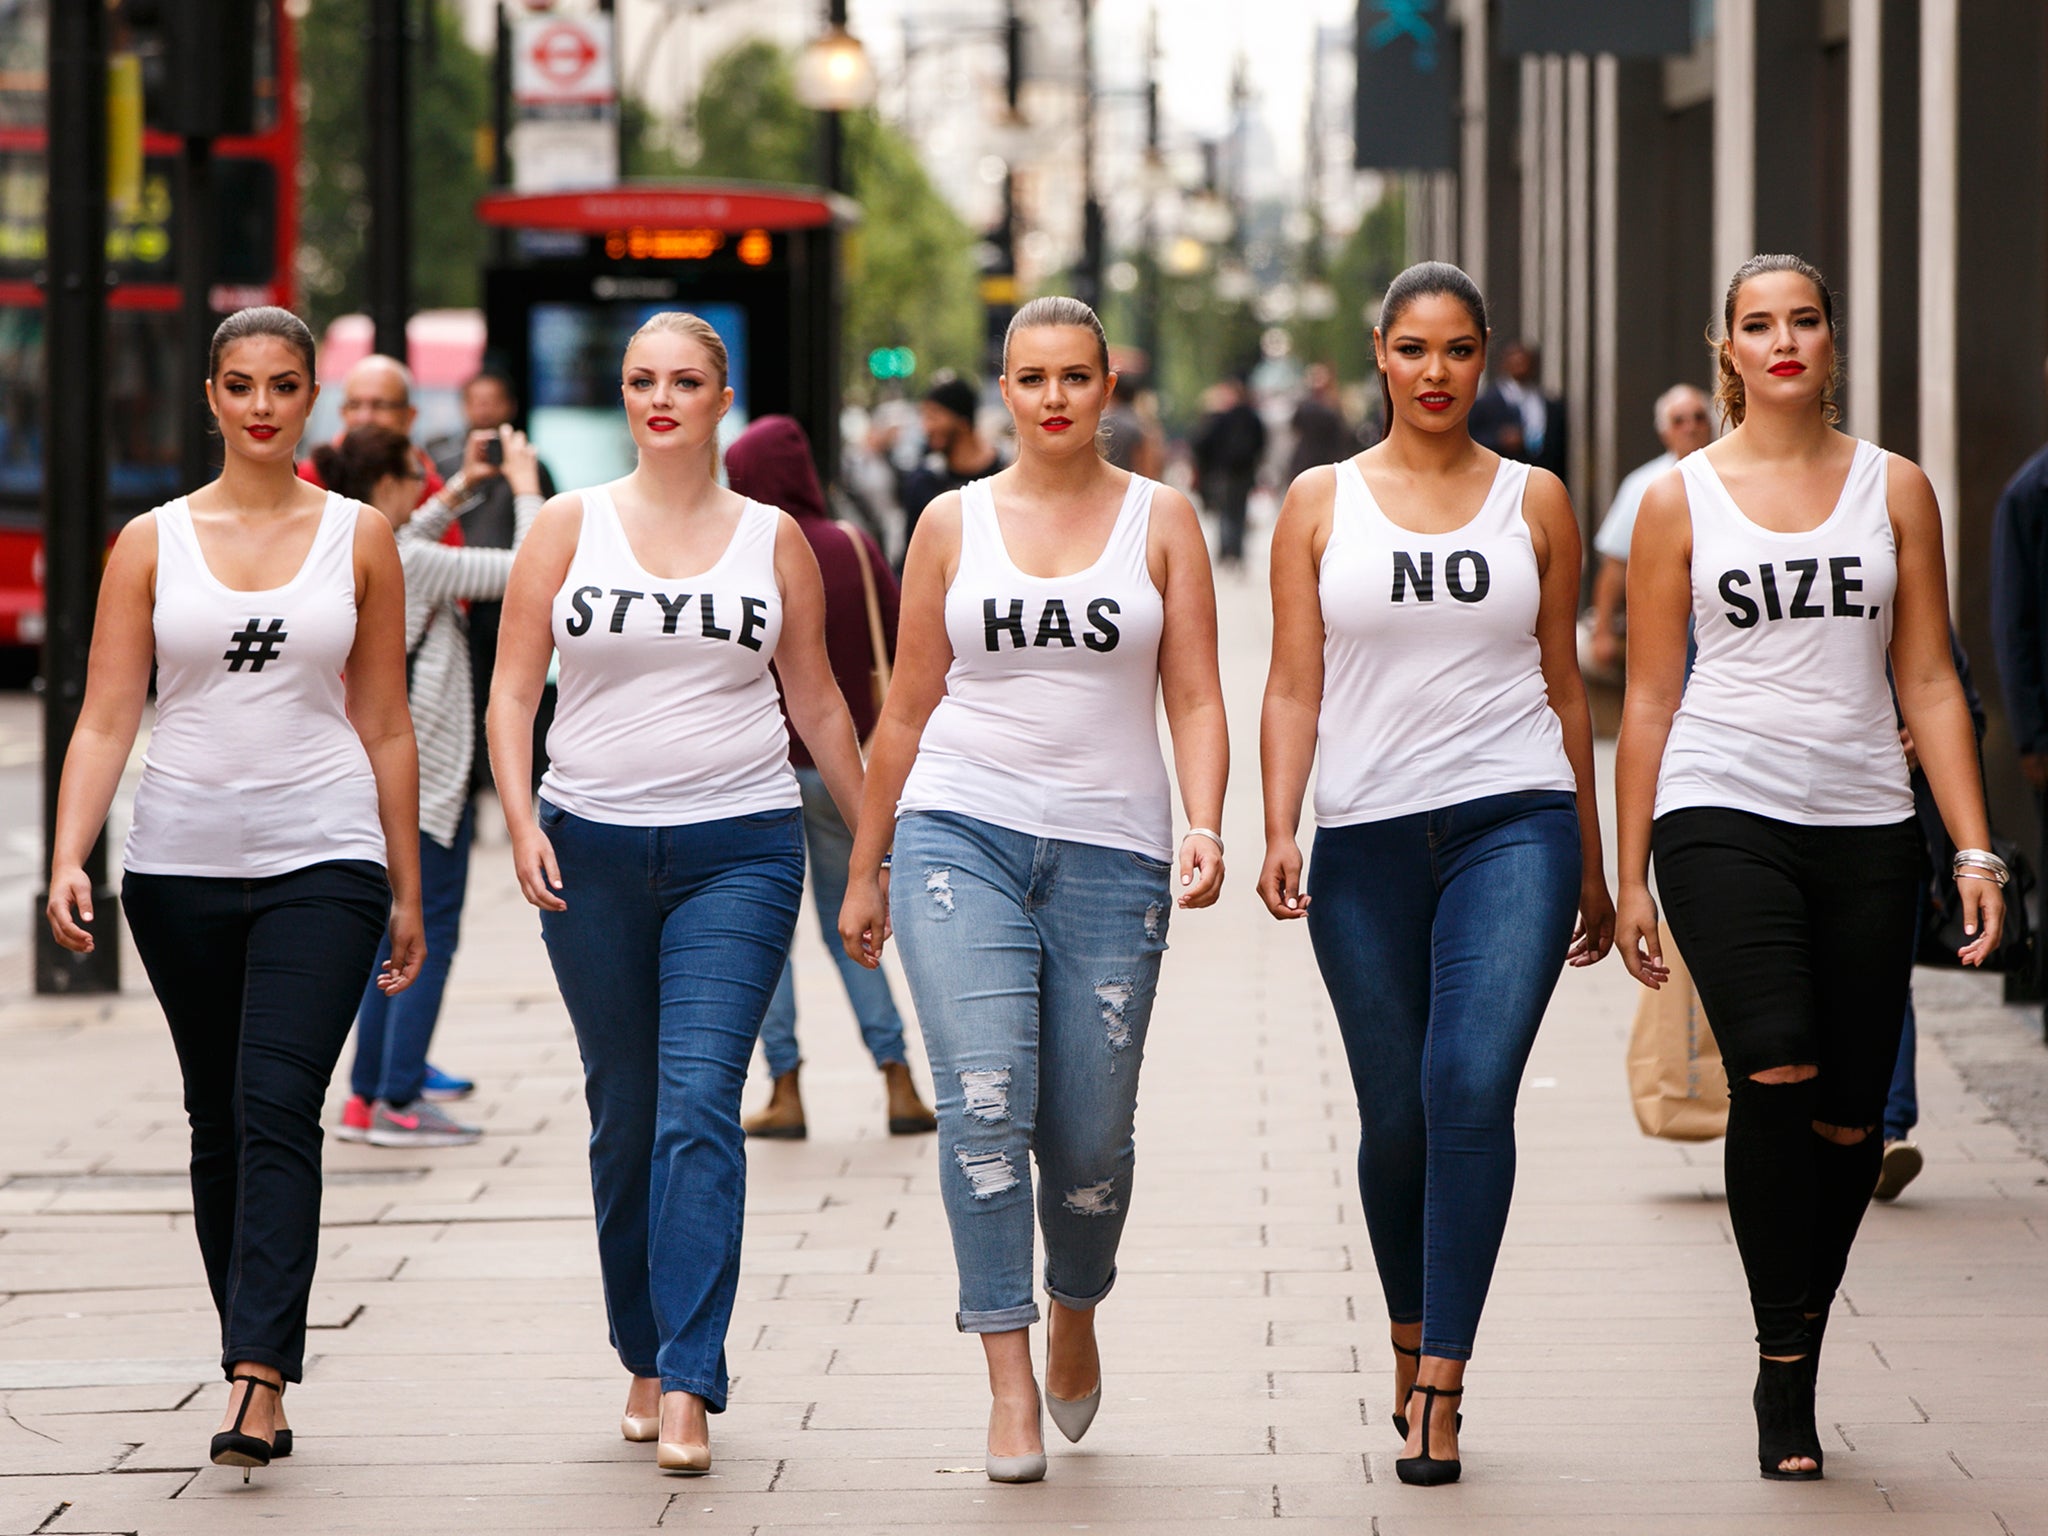 The plus-size community shouldn't be let down by its own brands